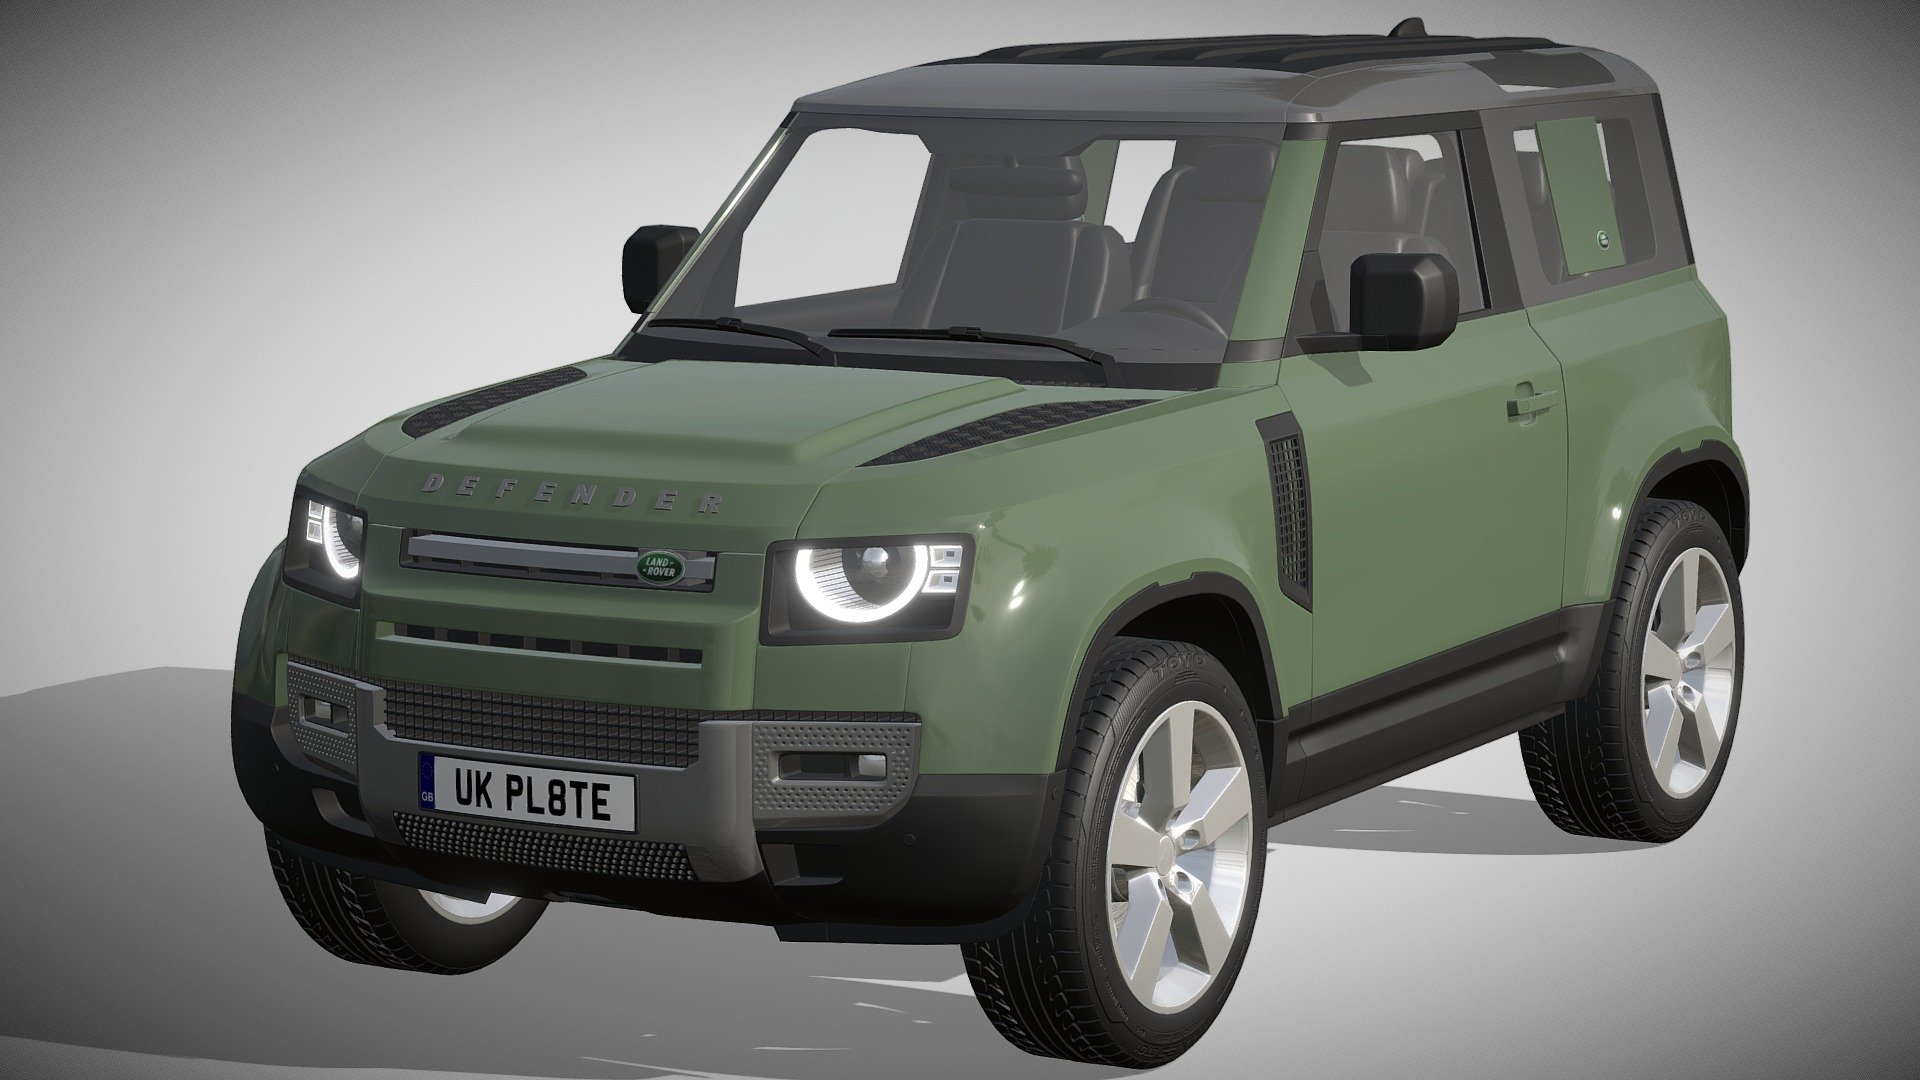 Land Rover Defender 90 2020

https://www.landrover.com/vehicles/defender/index.html

Clean geometry Light weight model, yet completely detailed for HI-Res renders. Use for movies, Advertisements or games

Corona render and materials

All textures include in *.rar files

Lighting setup is not included in the file! - Land Rover Defender 90 2020 - Buy Royalty Free 3D model by zifir3d 3d model